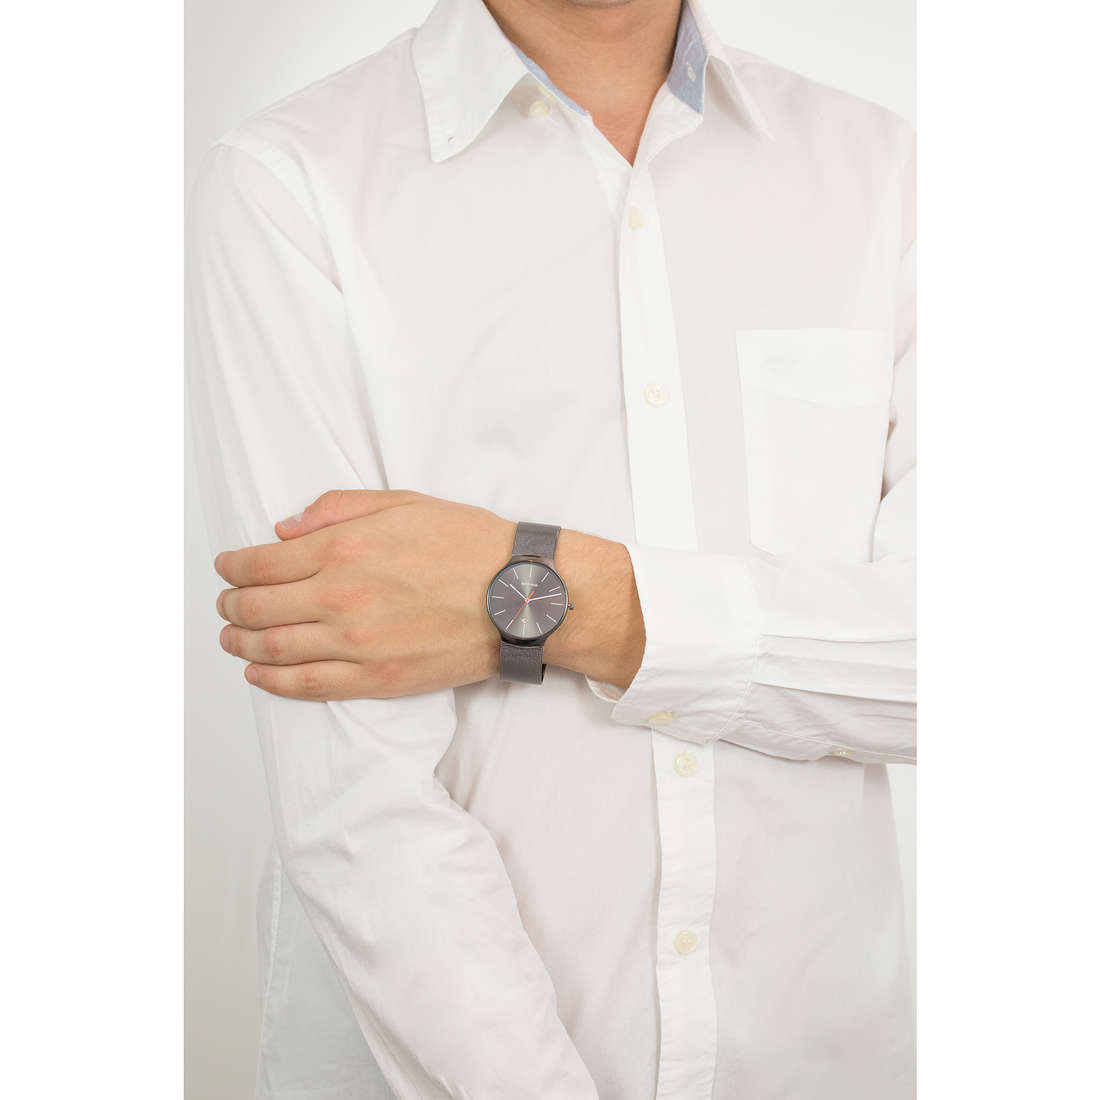 Bering only time Classic man 13338-077 wearing